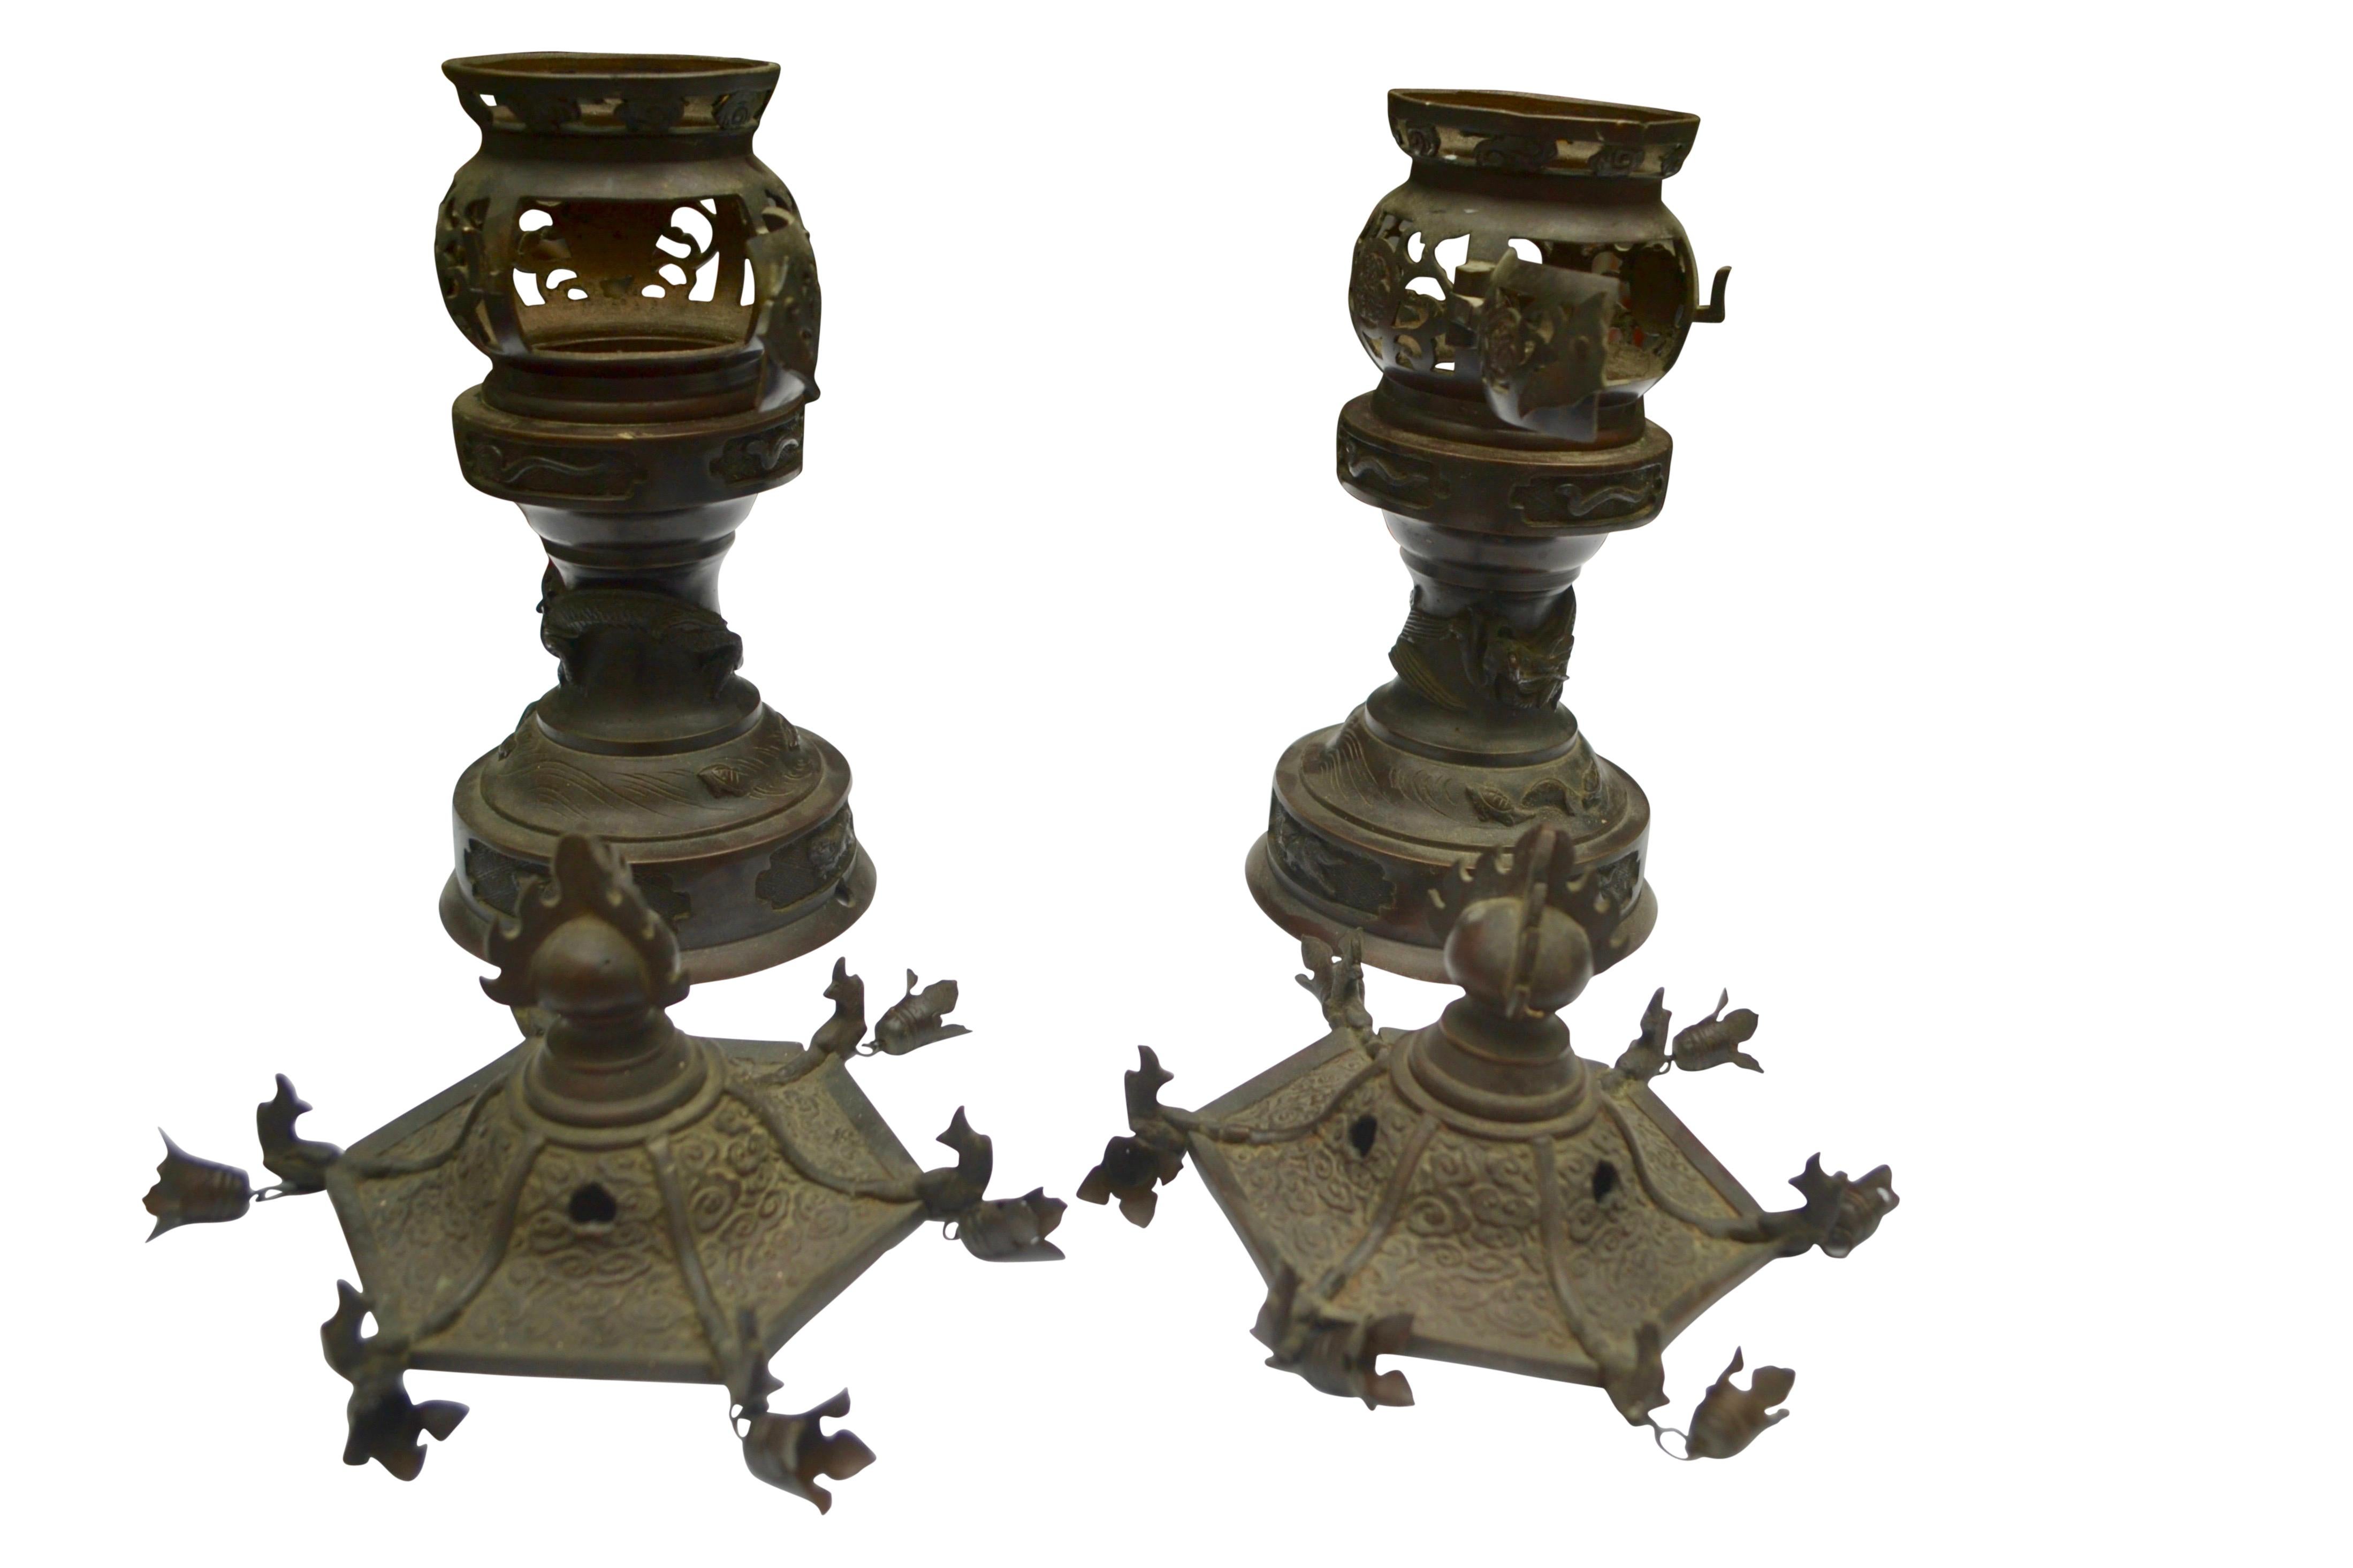 19th Century Pair of Qing Dynasty Patinated Bronze Censors/Perfume Burners